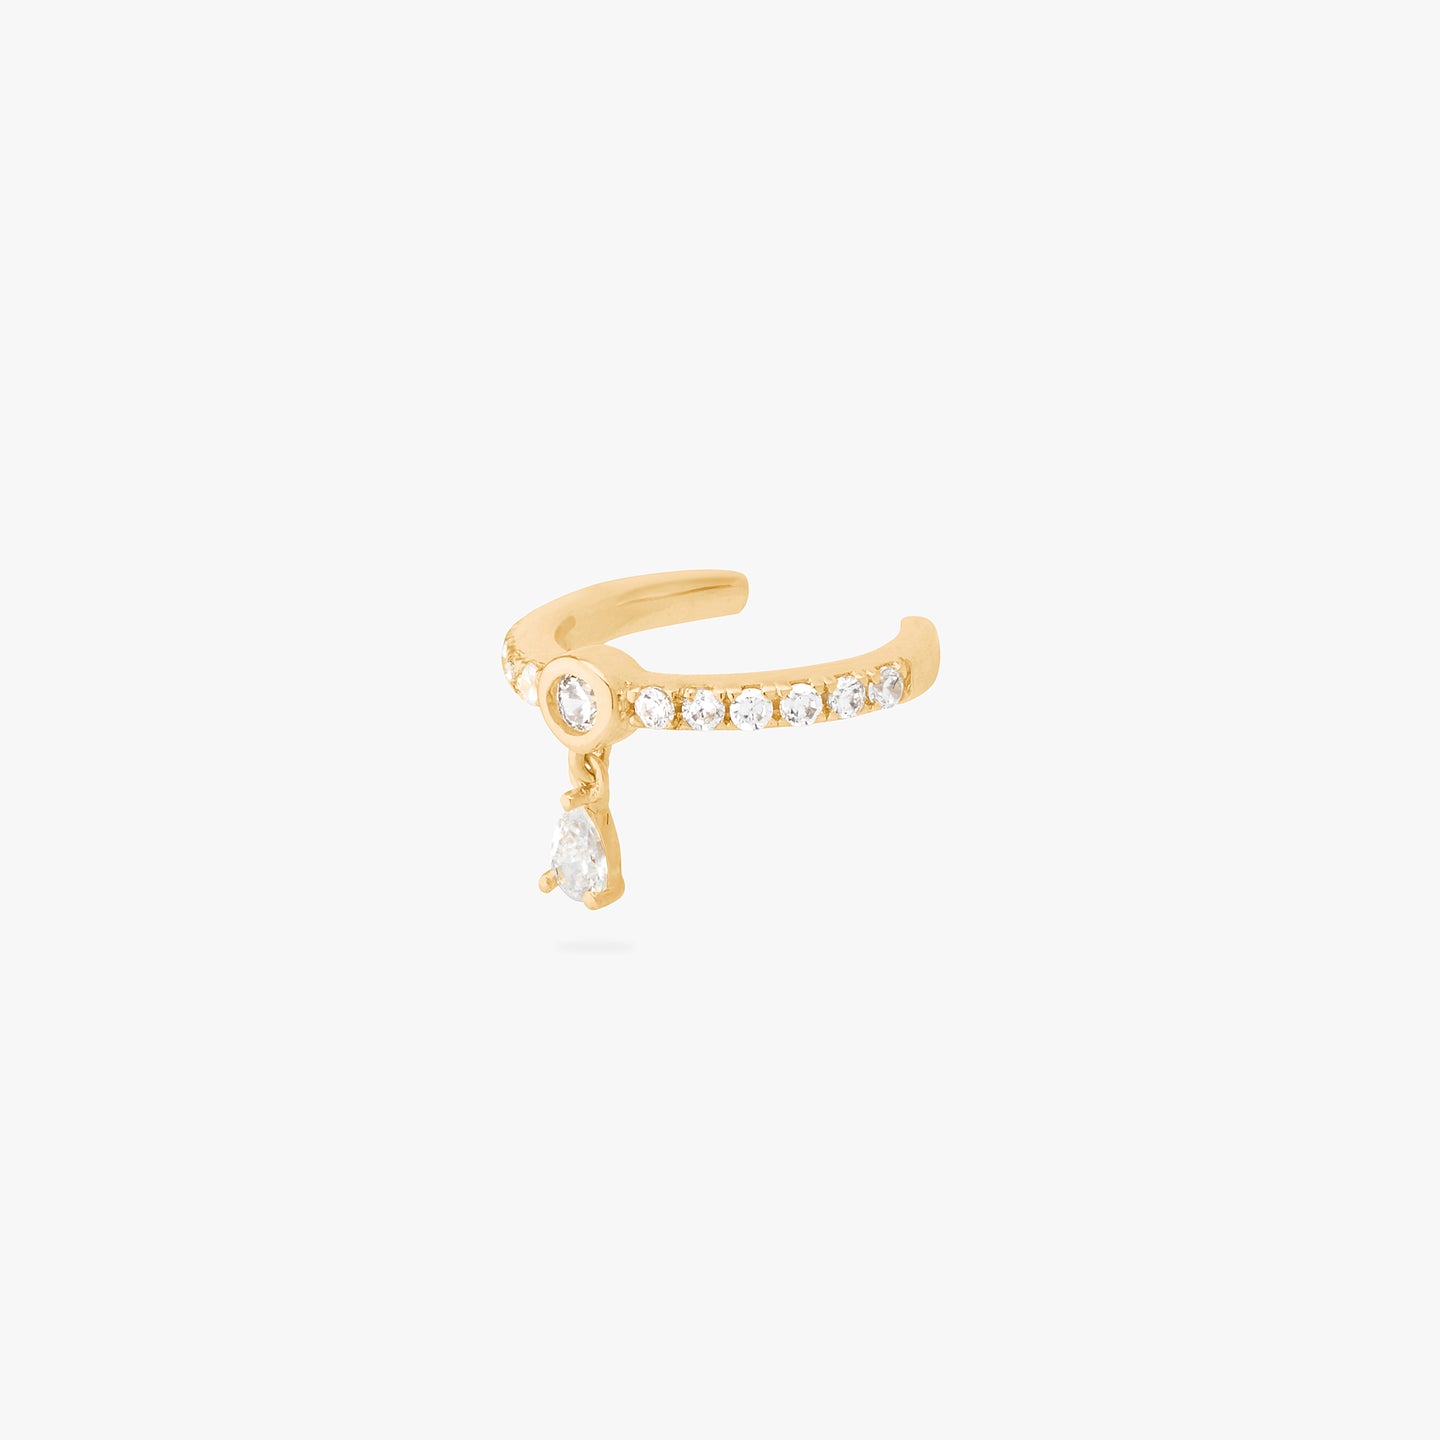 a gold/clear pave slim cuff with a bezel set clear cz stone that a second cz stone dangles from. color:null|gold/clear